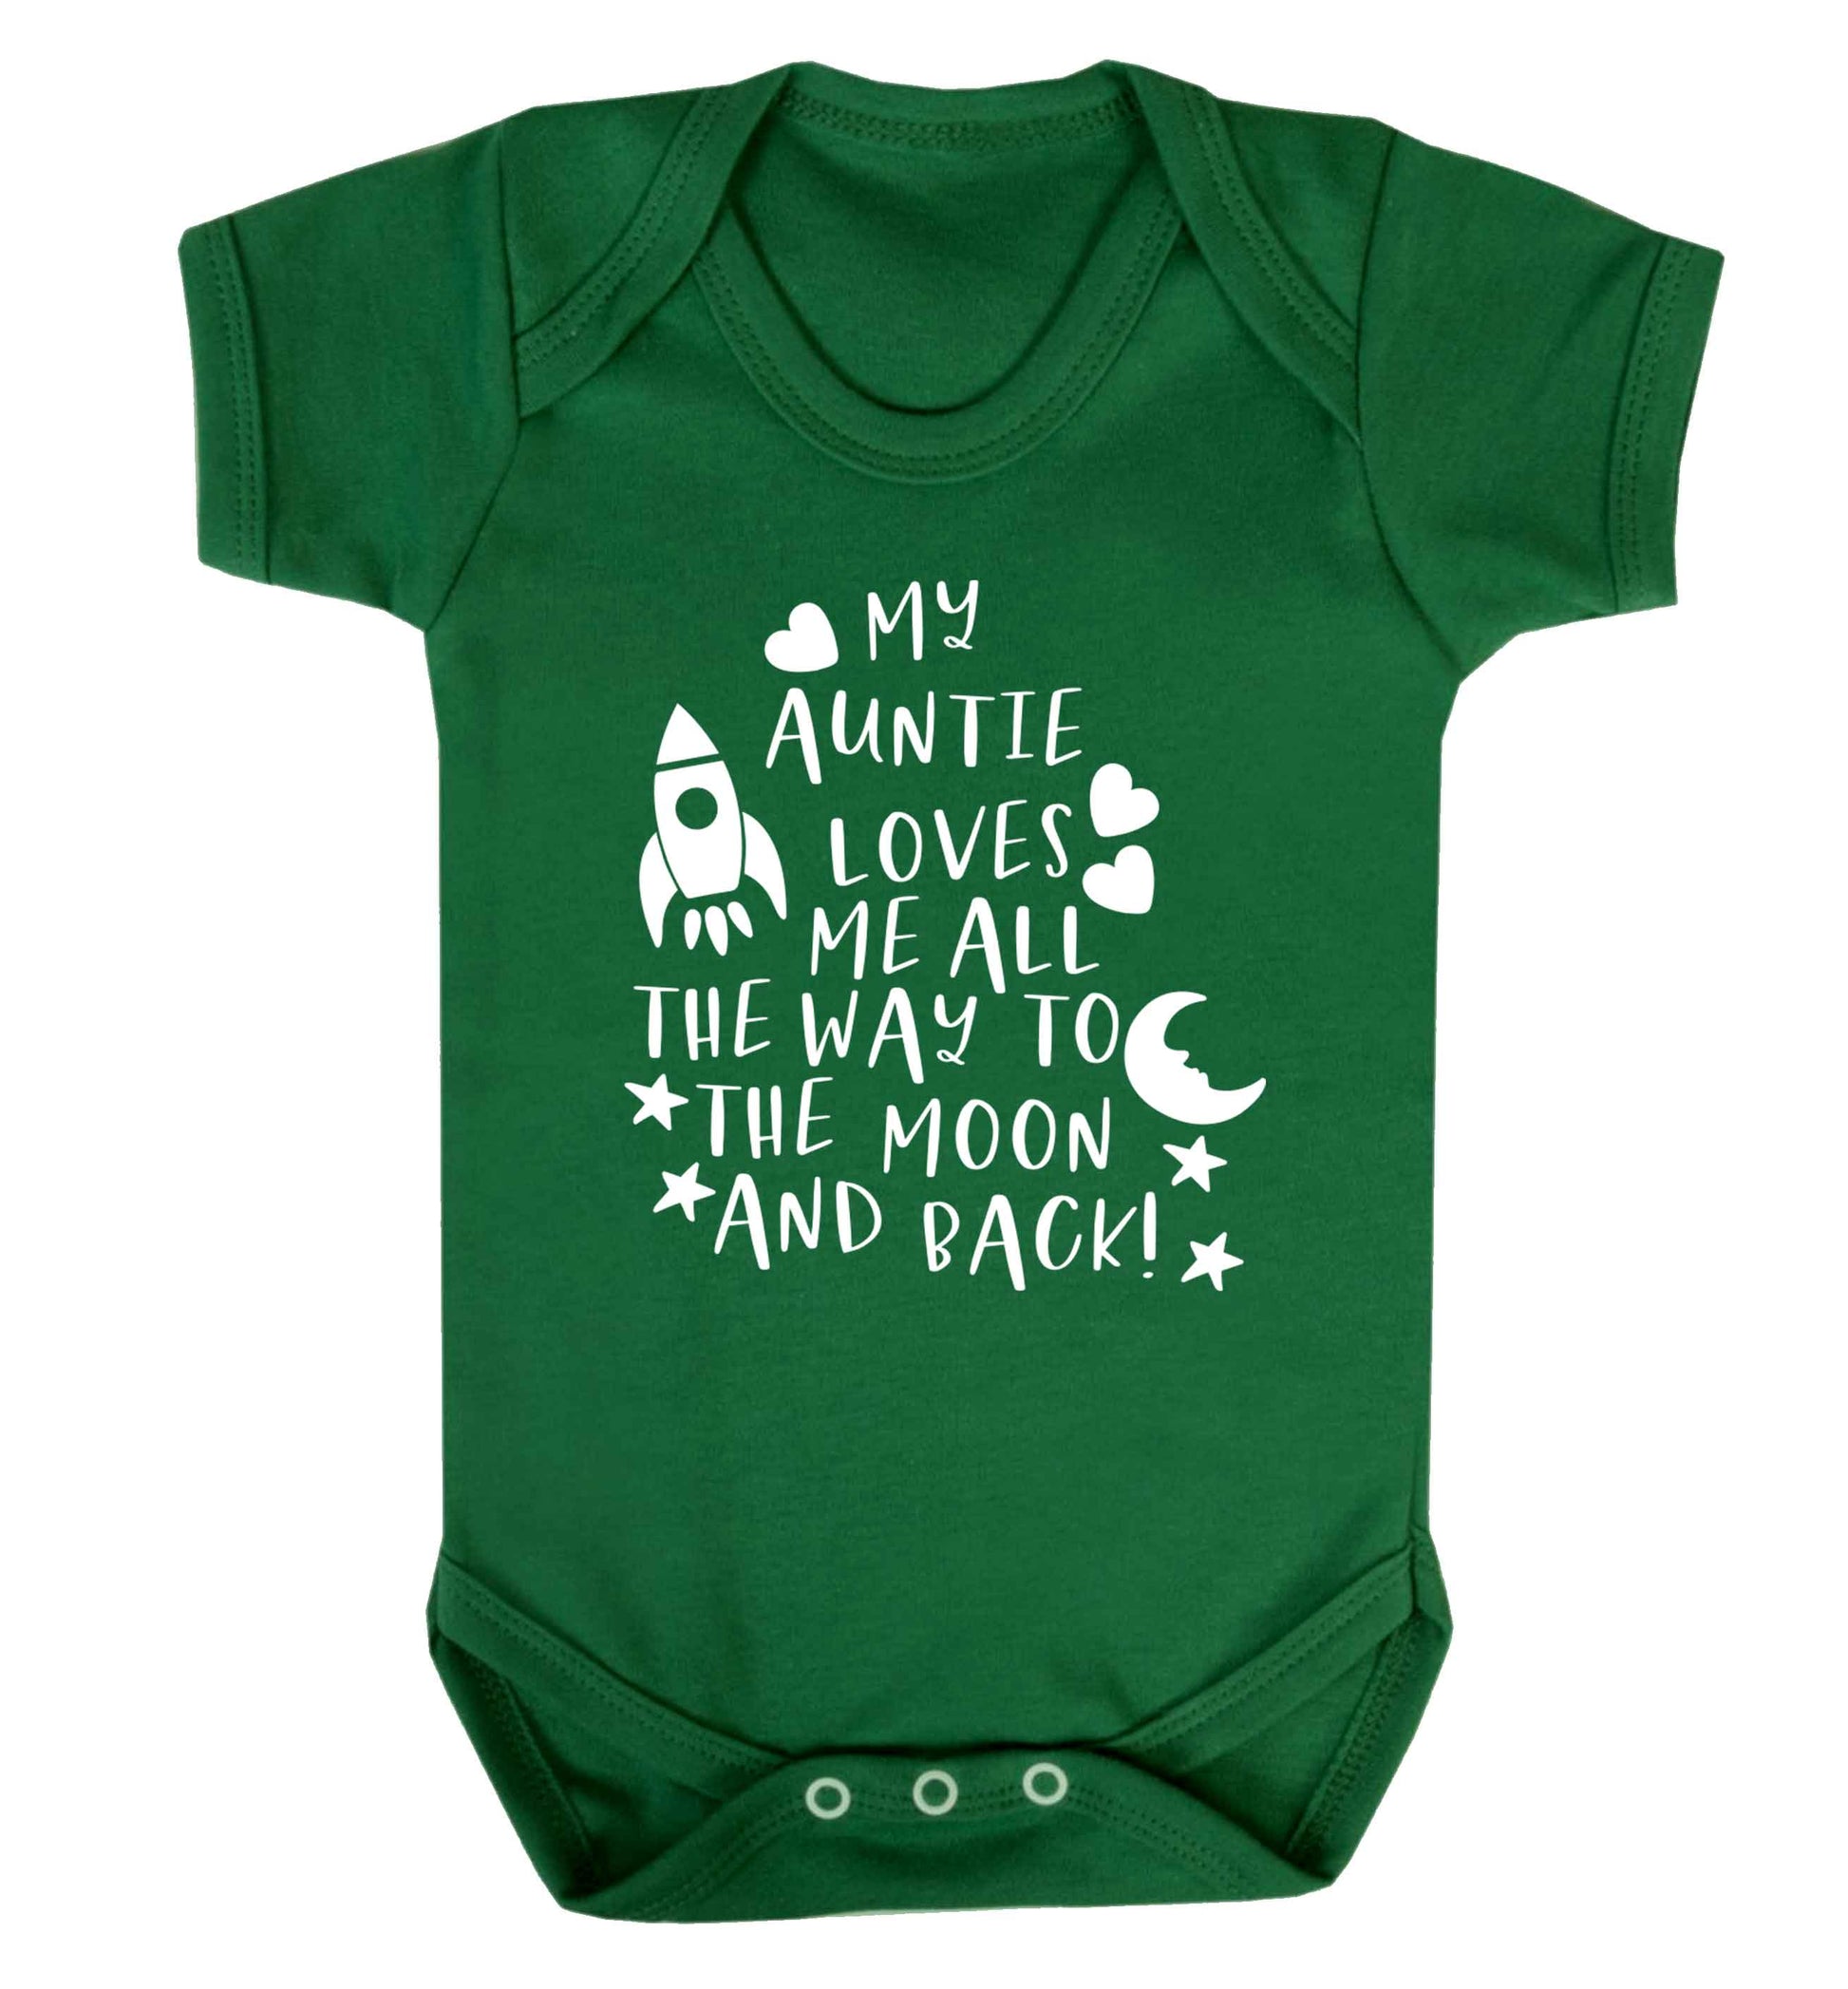 My auntie loves me all the way to the moon and back Baby Vest green 18-24 months